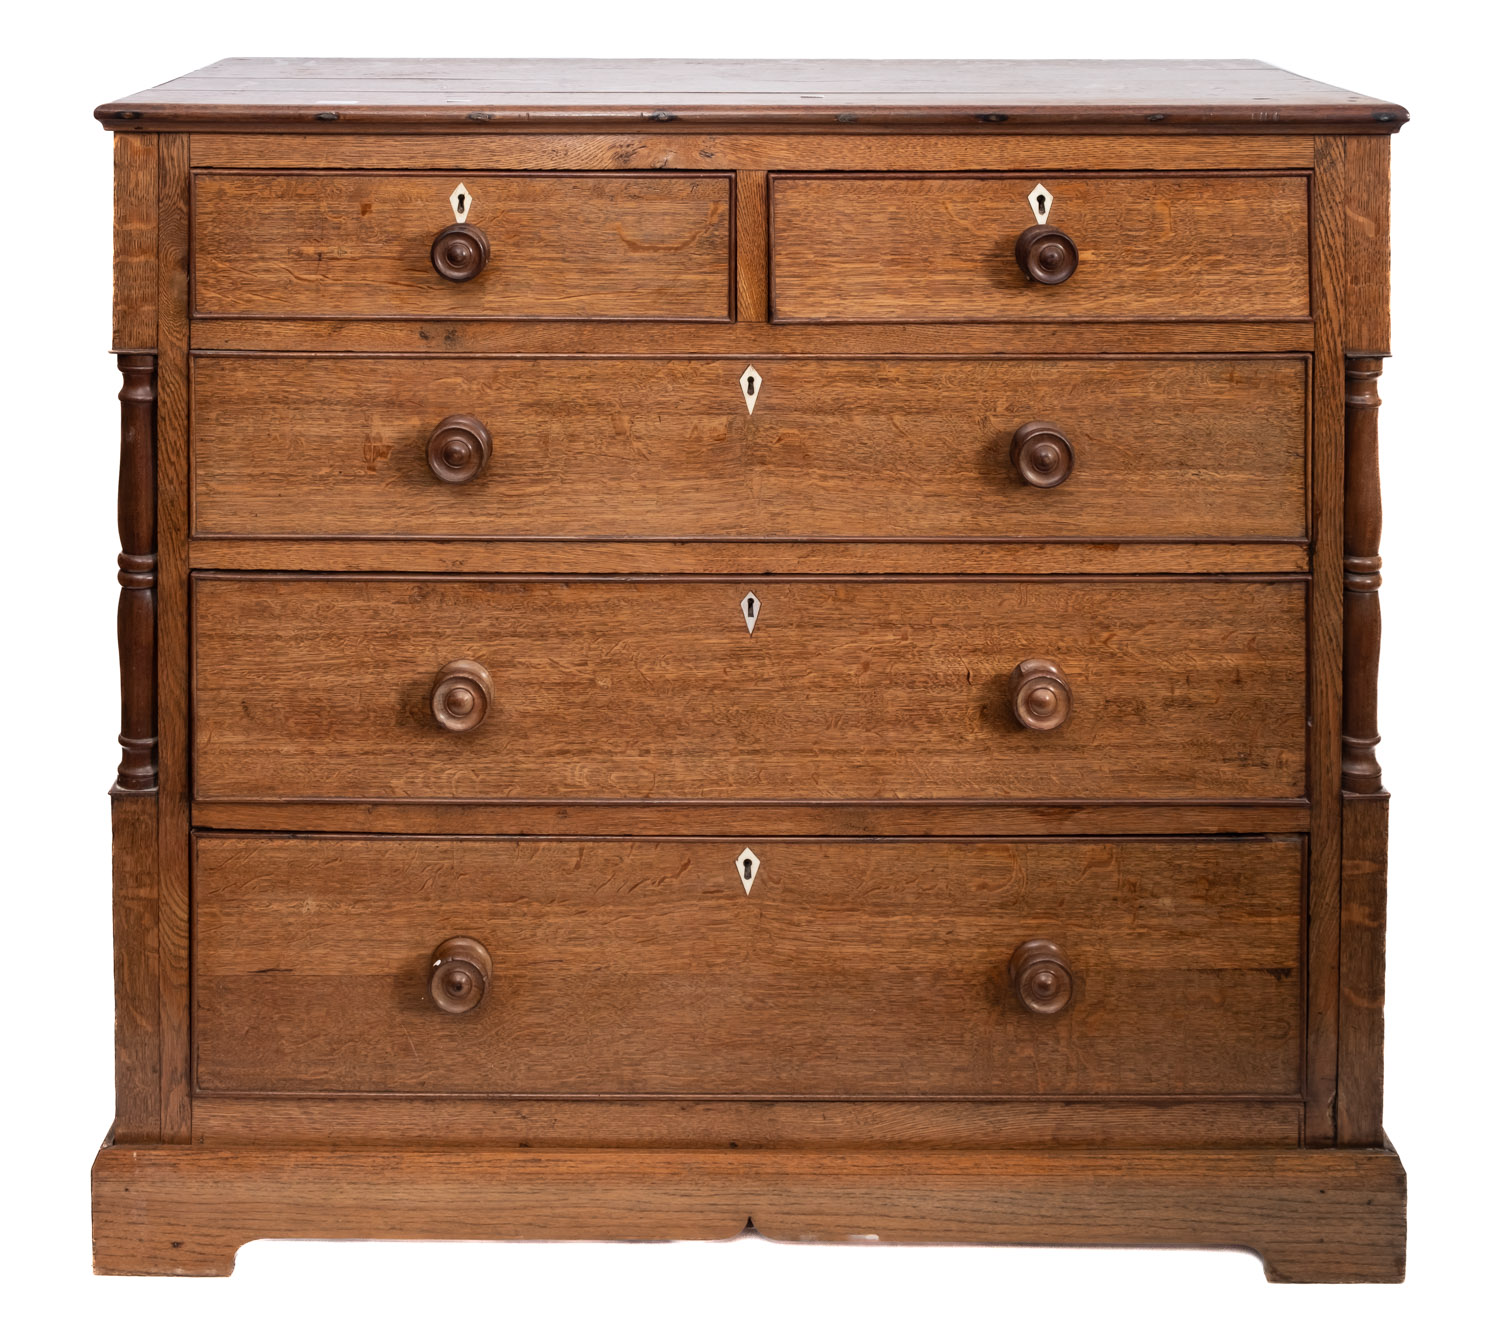 An early 19th Century oak rectangular chest containing two short and three long drawers between